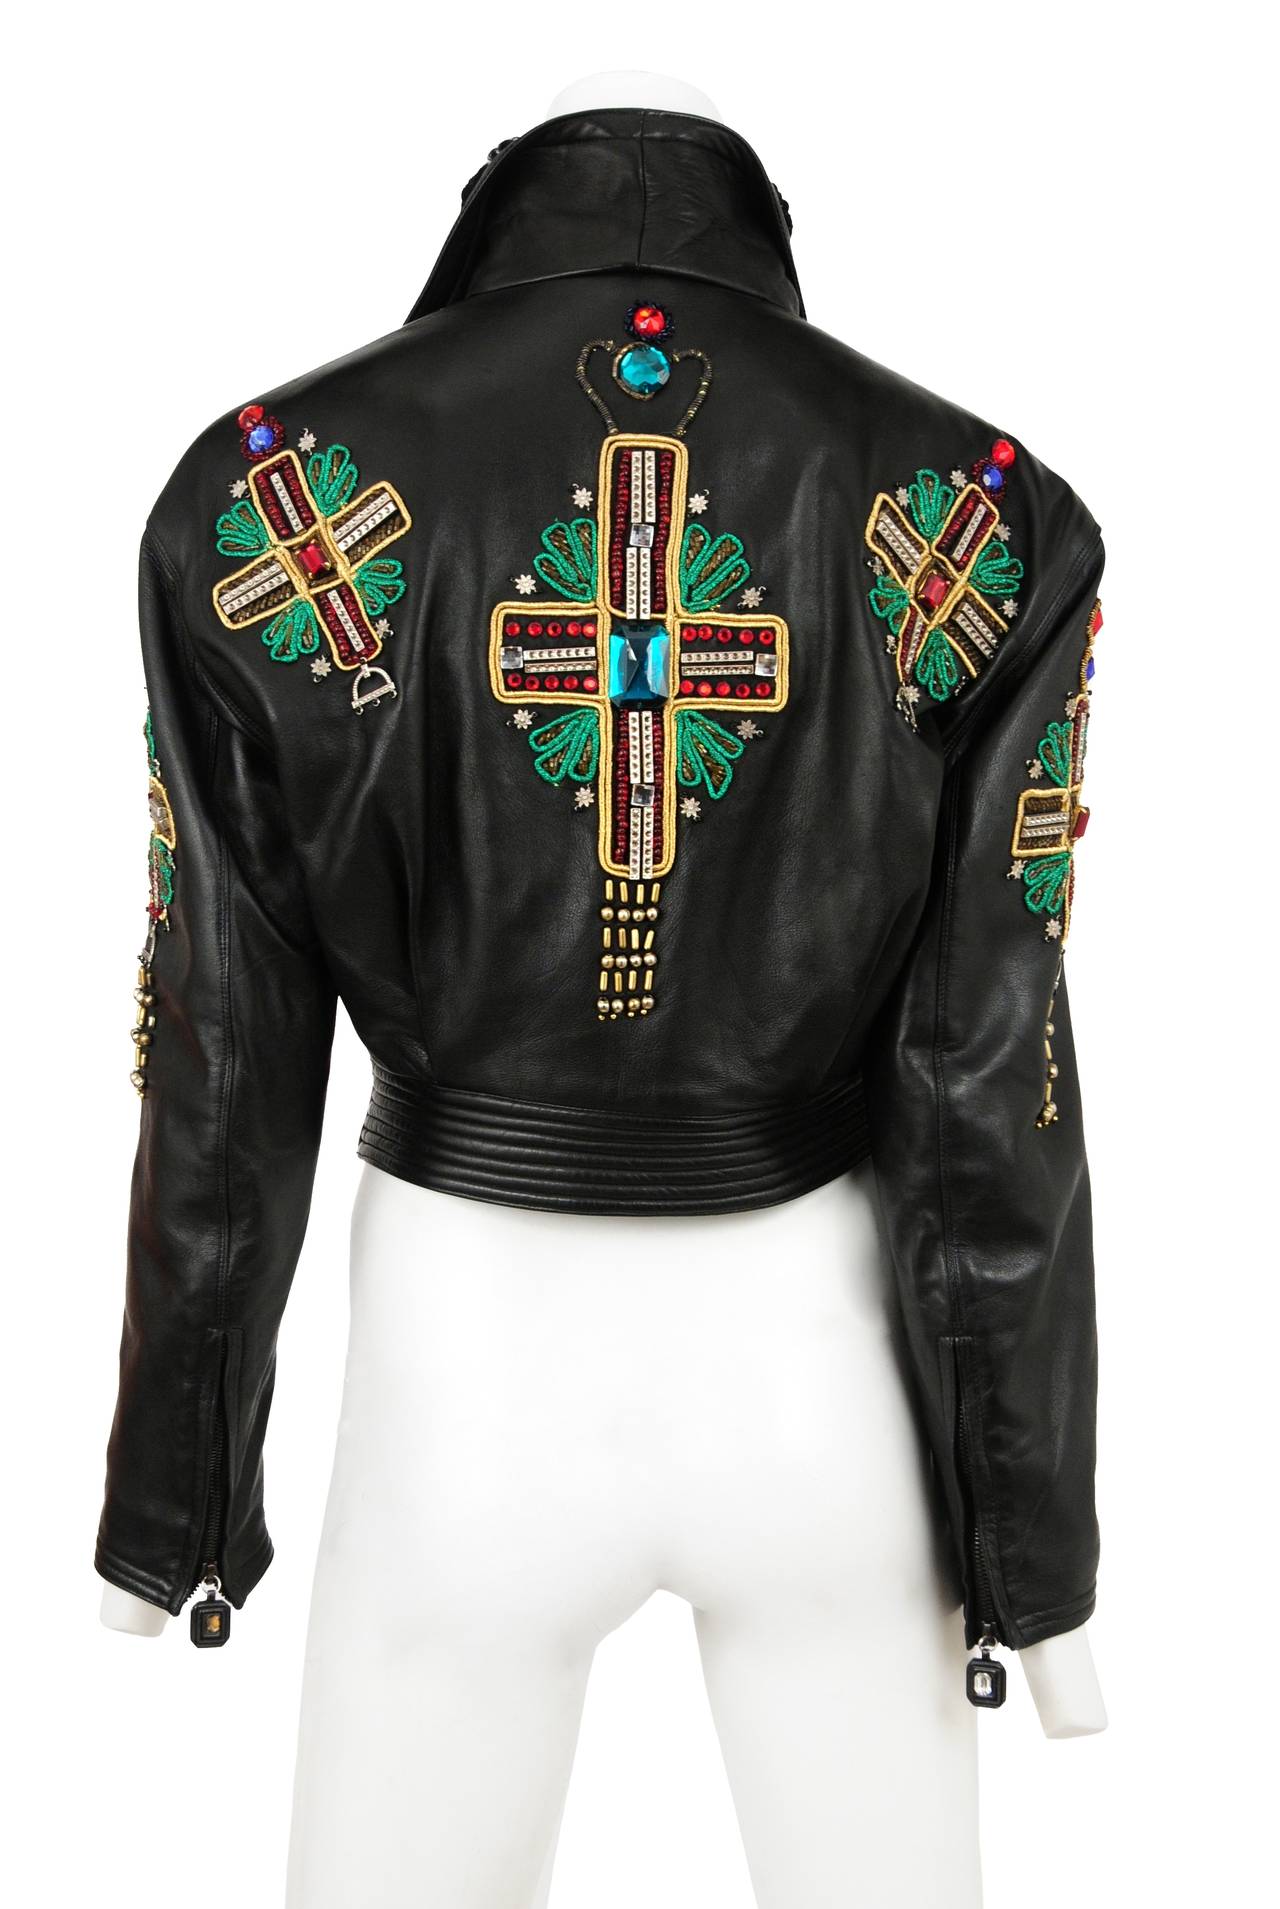 Gianni Versace Iconic leather cropped motorcycle jacket with embellished jeweled cross emblems and mongolian fur collar. Lining is quilted in silk satin.